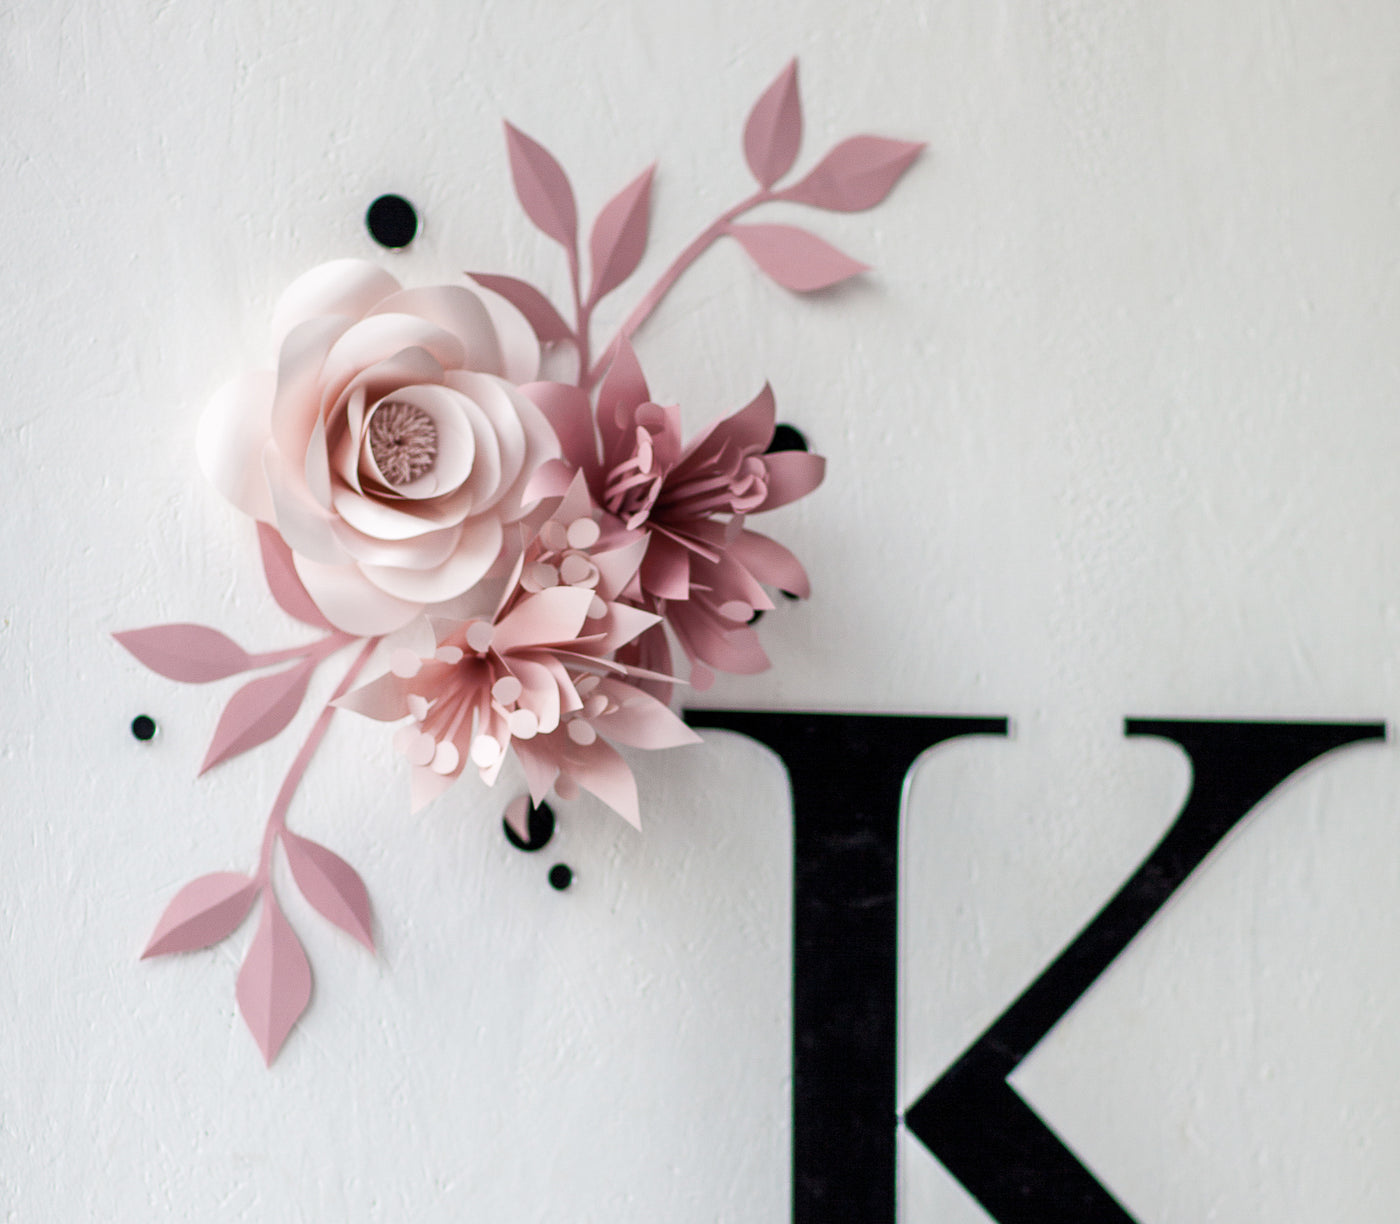 Captivating Arrangement: 3 Paper Flowers on Each Side of the Initial Sign for a Striking Display